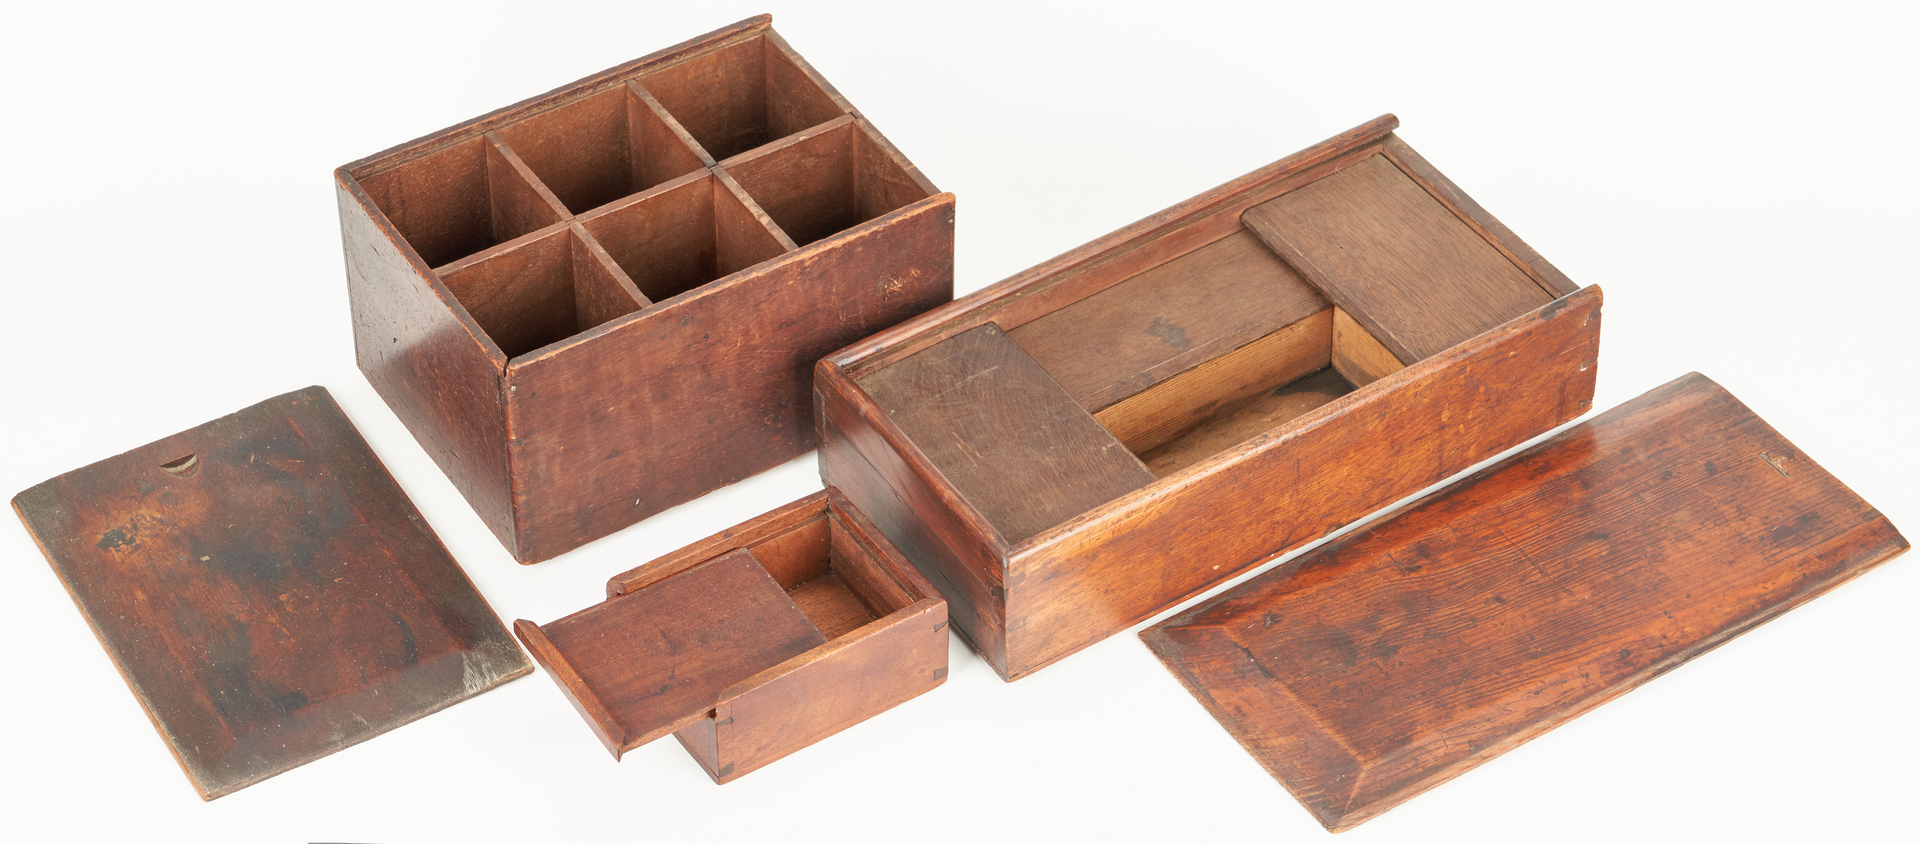 Lot 391: 5 Wooden Storage Boxes, incl. Painted Candle Box